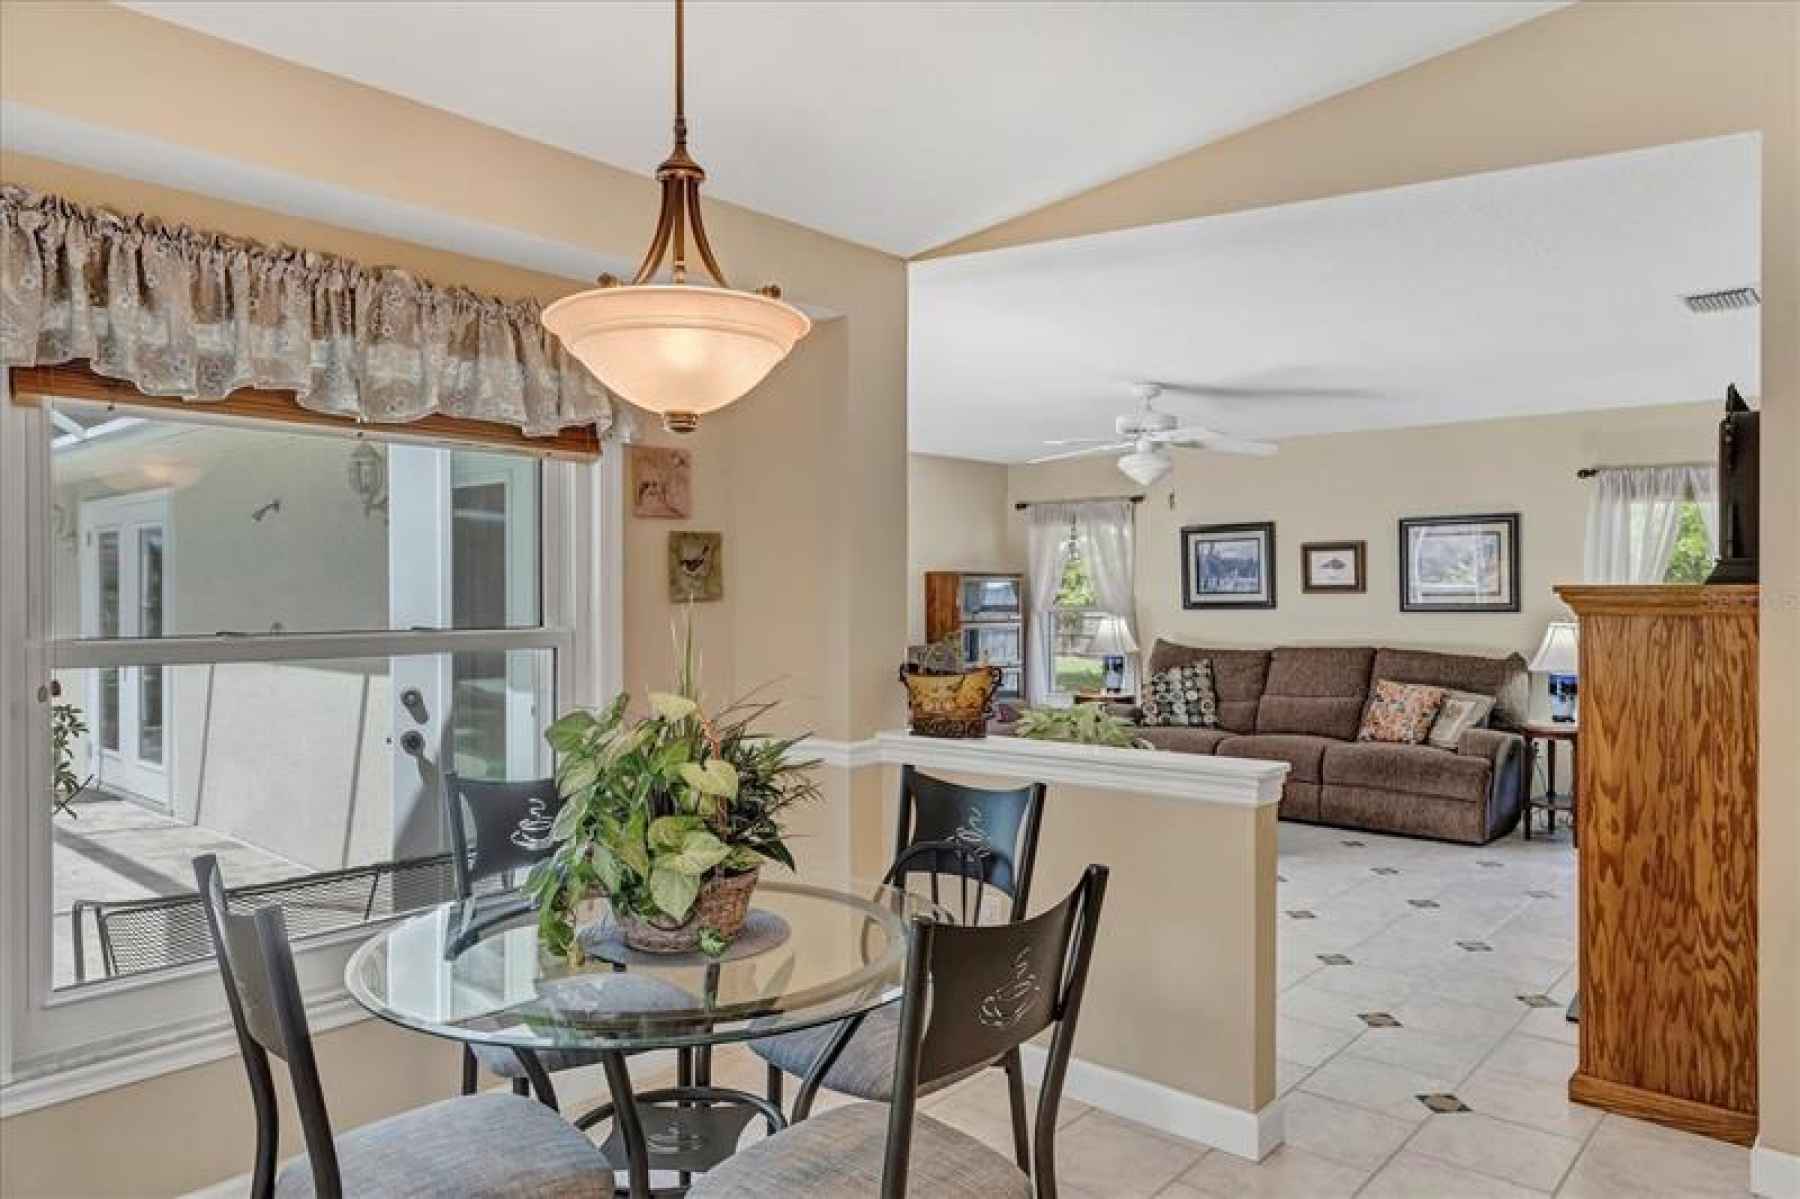 An open concept floor plan leads breakfast nook into the family room